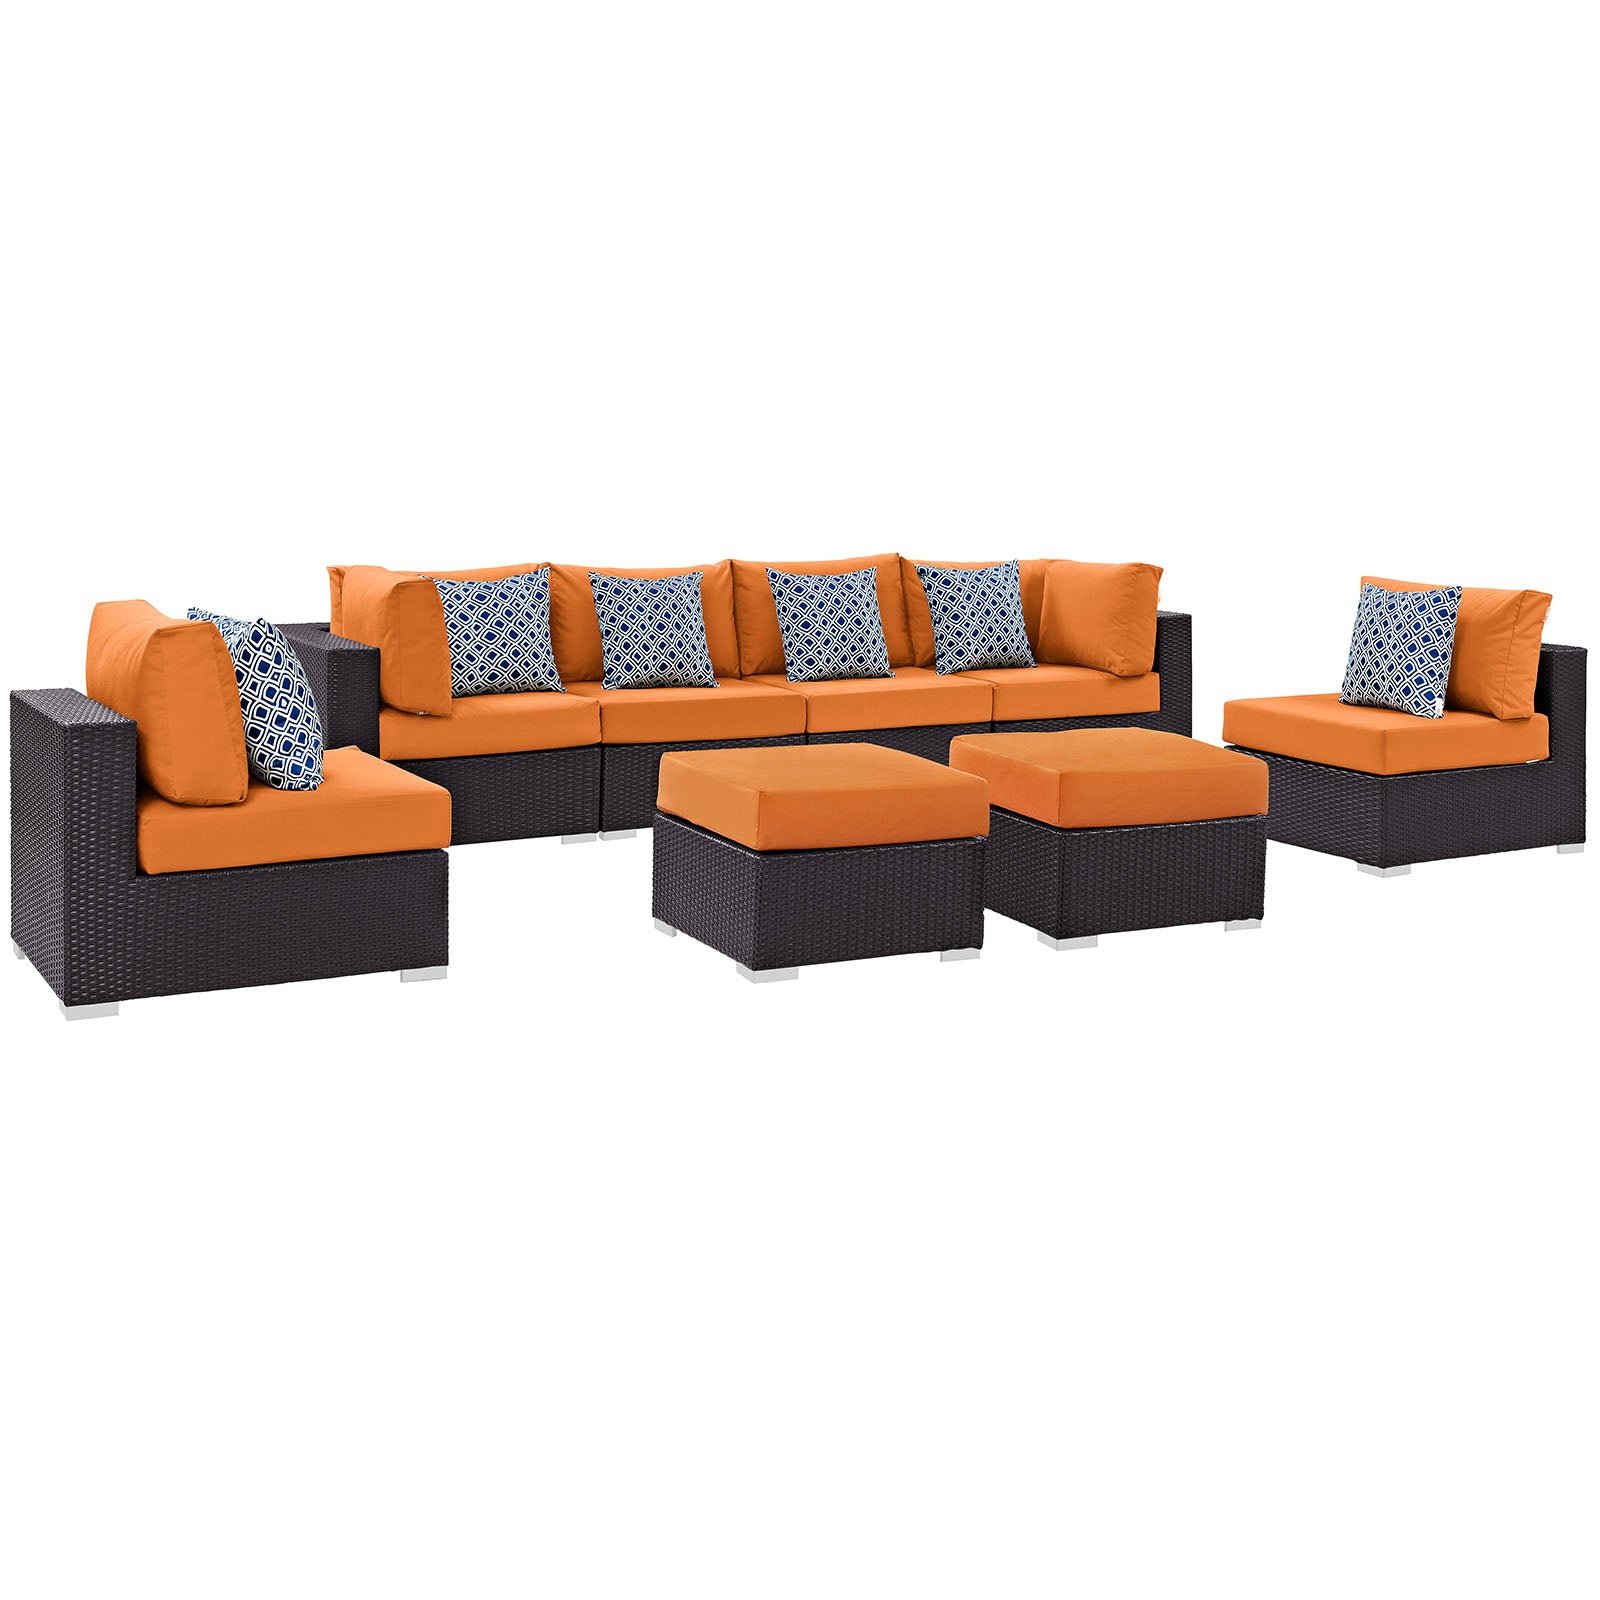 Convene 8 Piece Outdoor Patio Sectional Set-Outdoor Set-Modway-Wall2Wall Furnishings